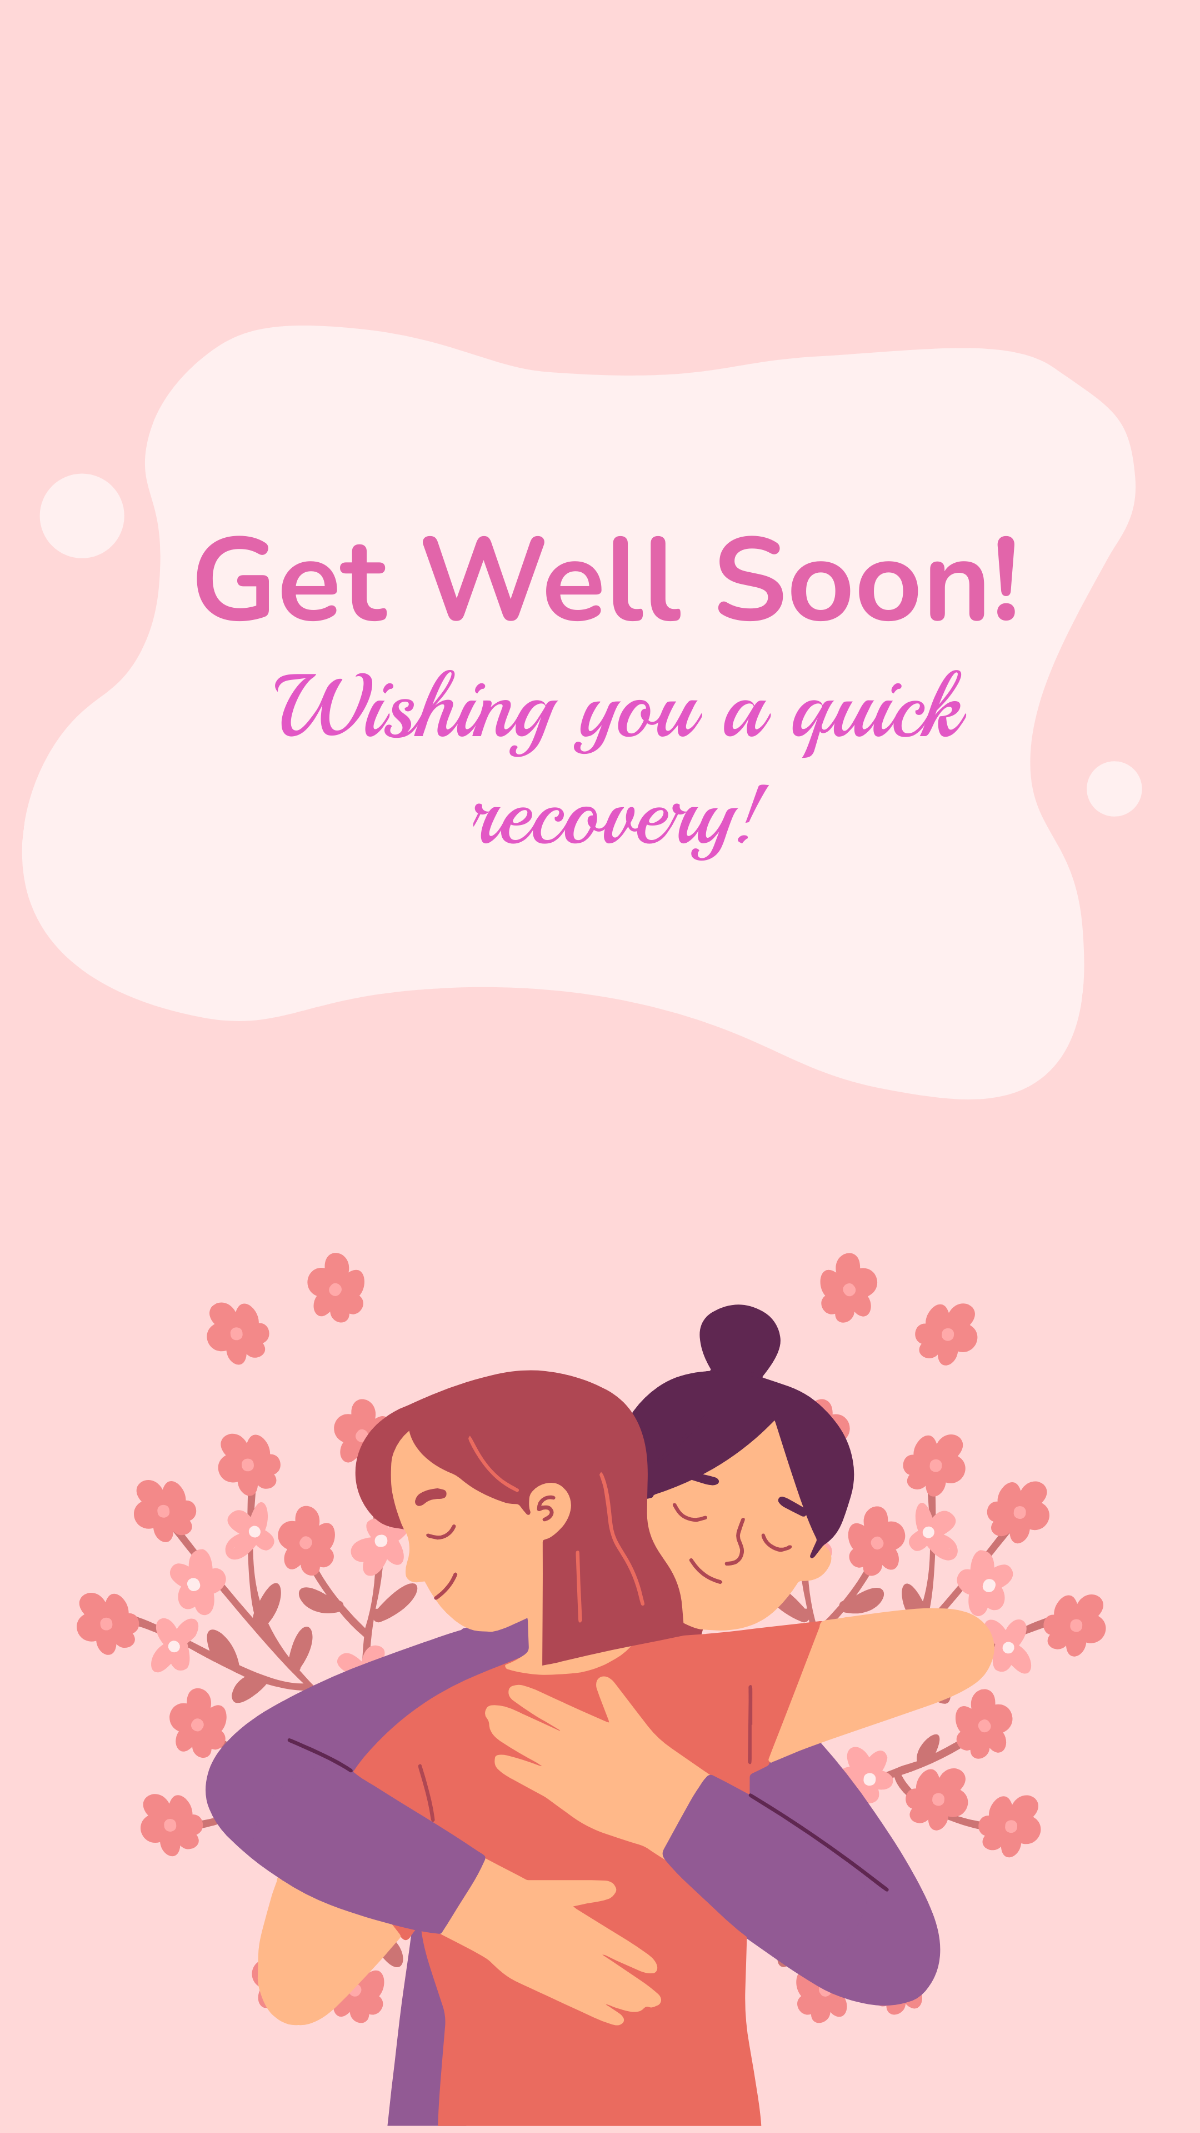 Get Well Soon Card For Friend